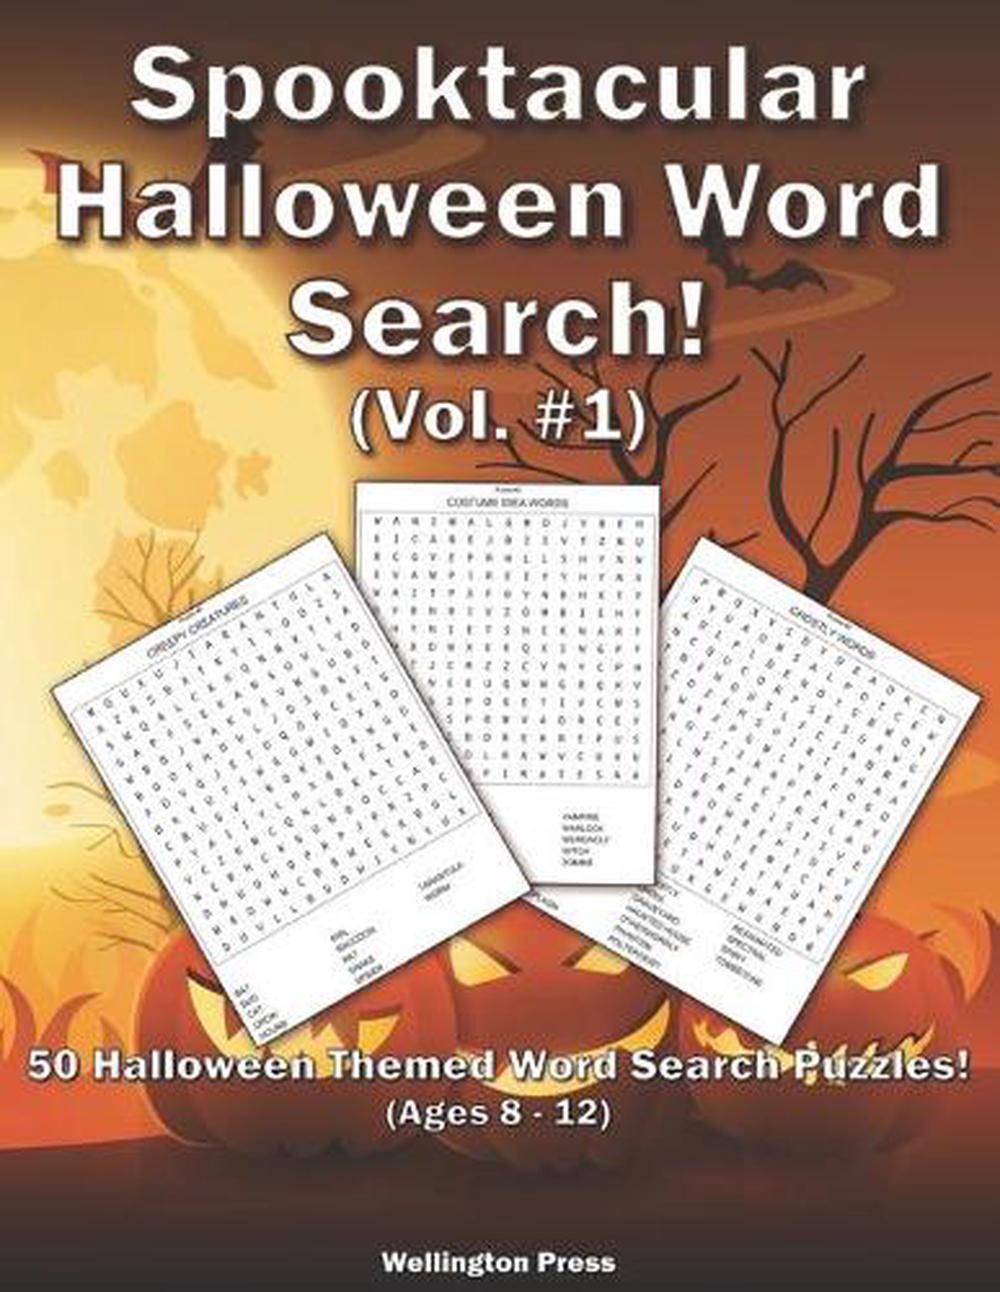 Spooktacular Halloween Word Search: 50 Halloween Themed Word Search Puzzles! (Ag 9781636730059 